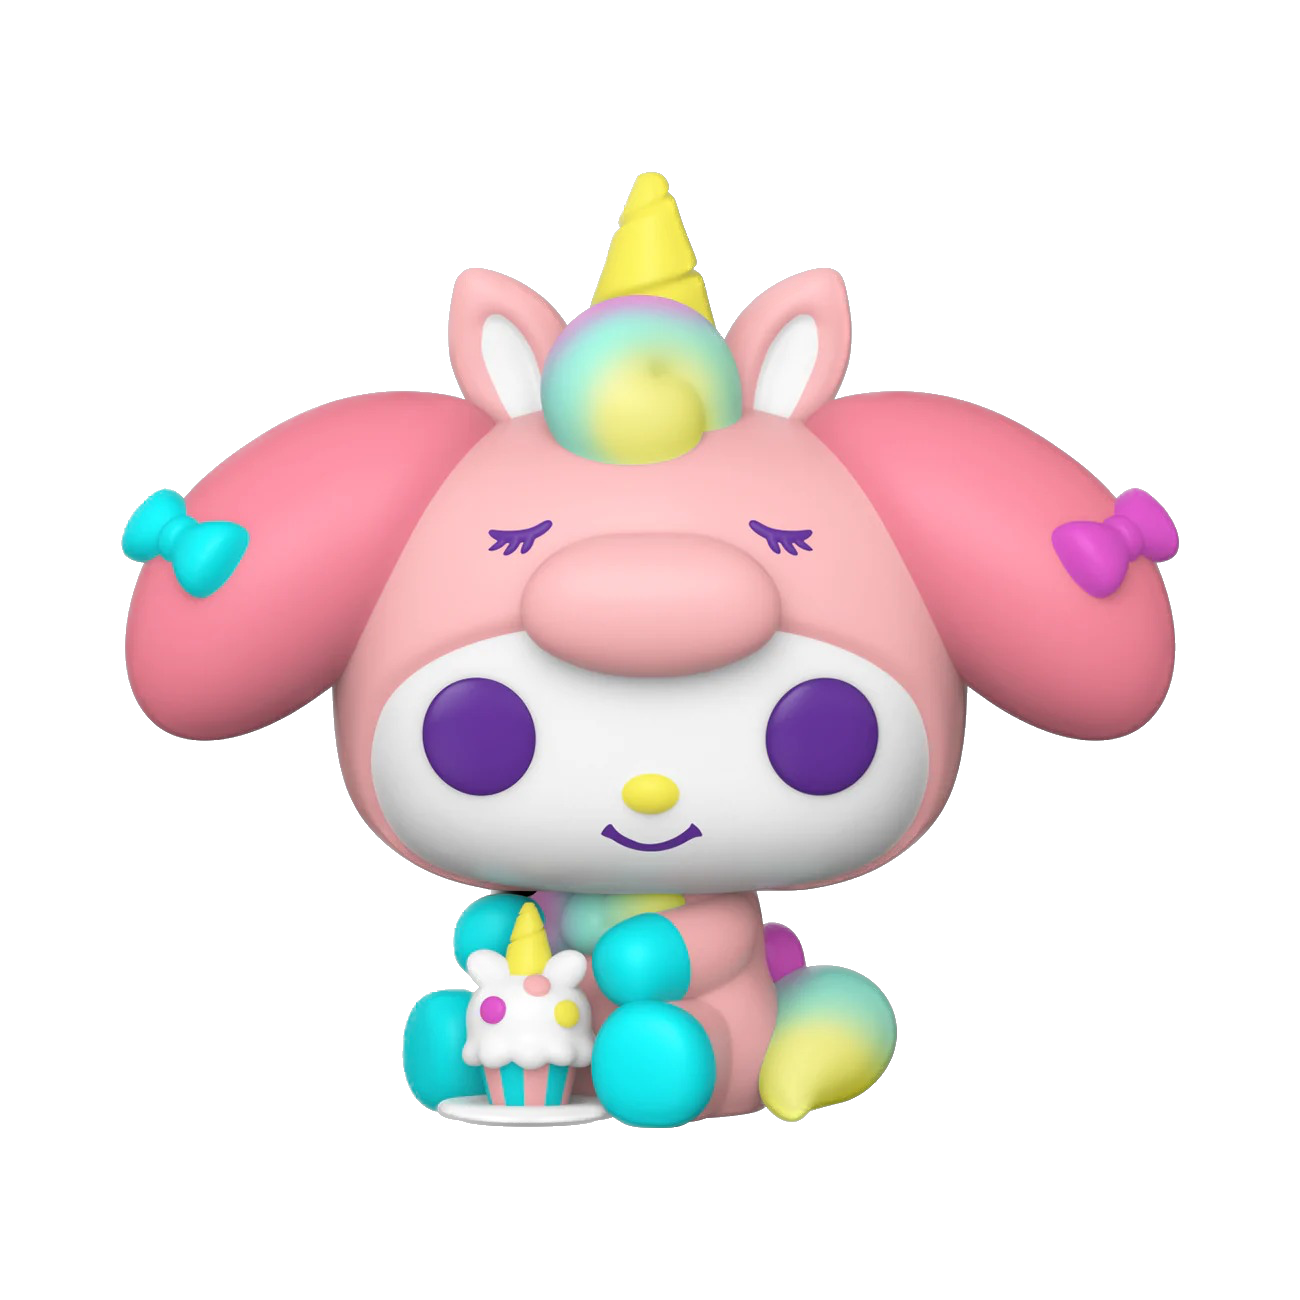 Hello Kitty and Friends - Funko Pop! #61 - My Melody